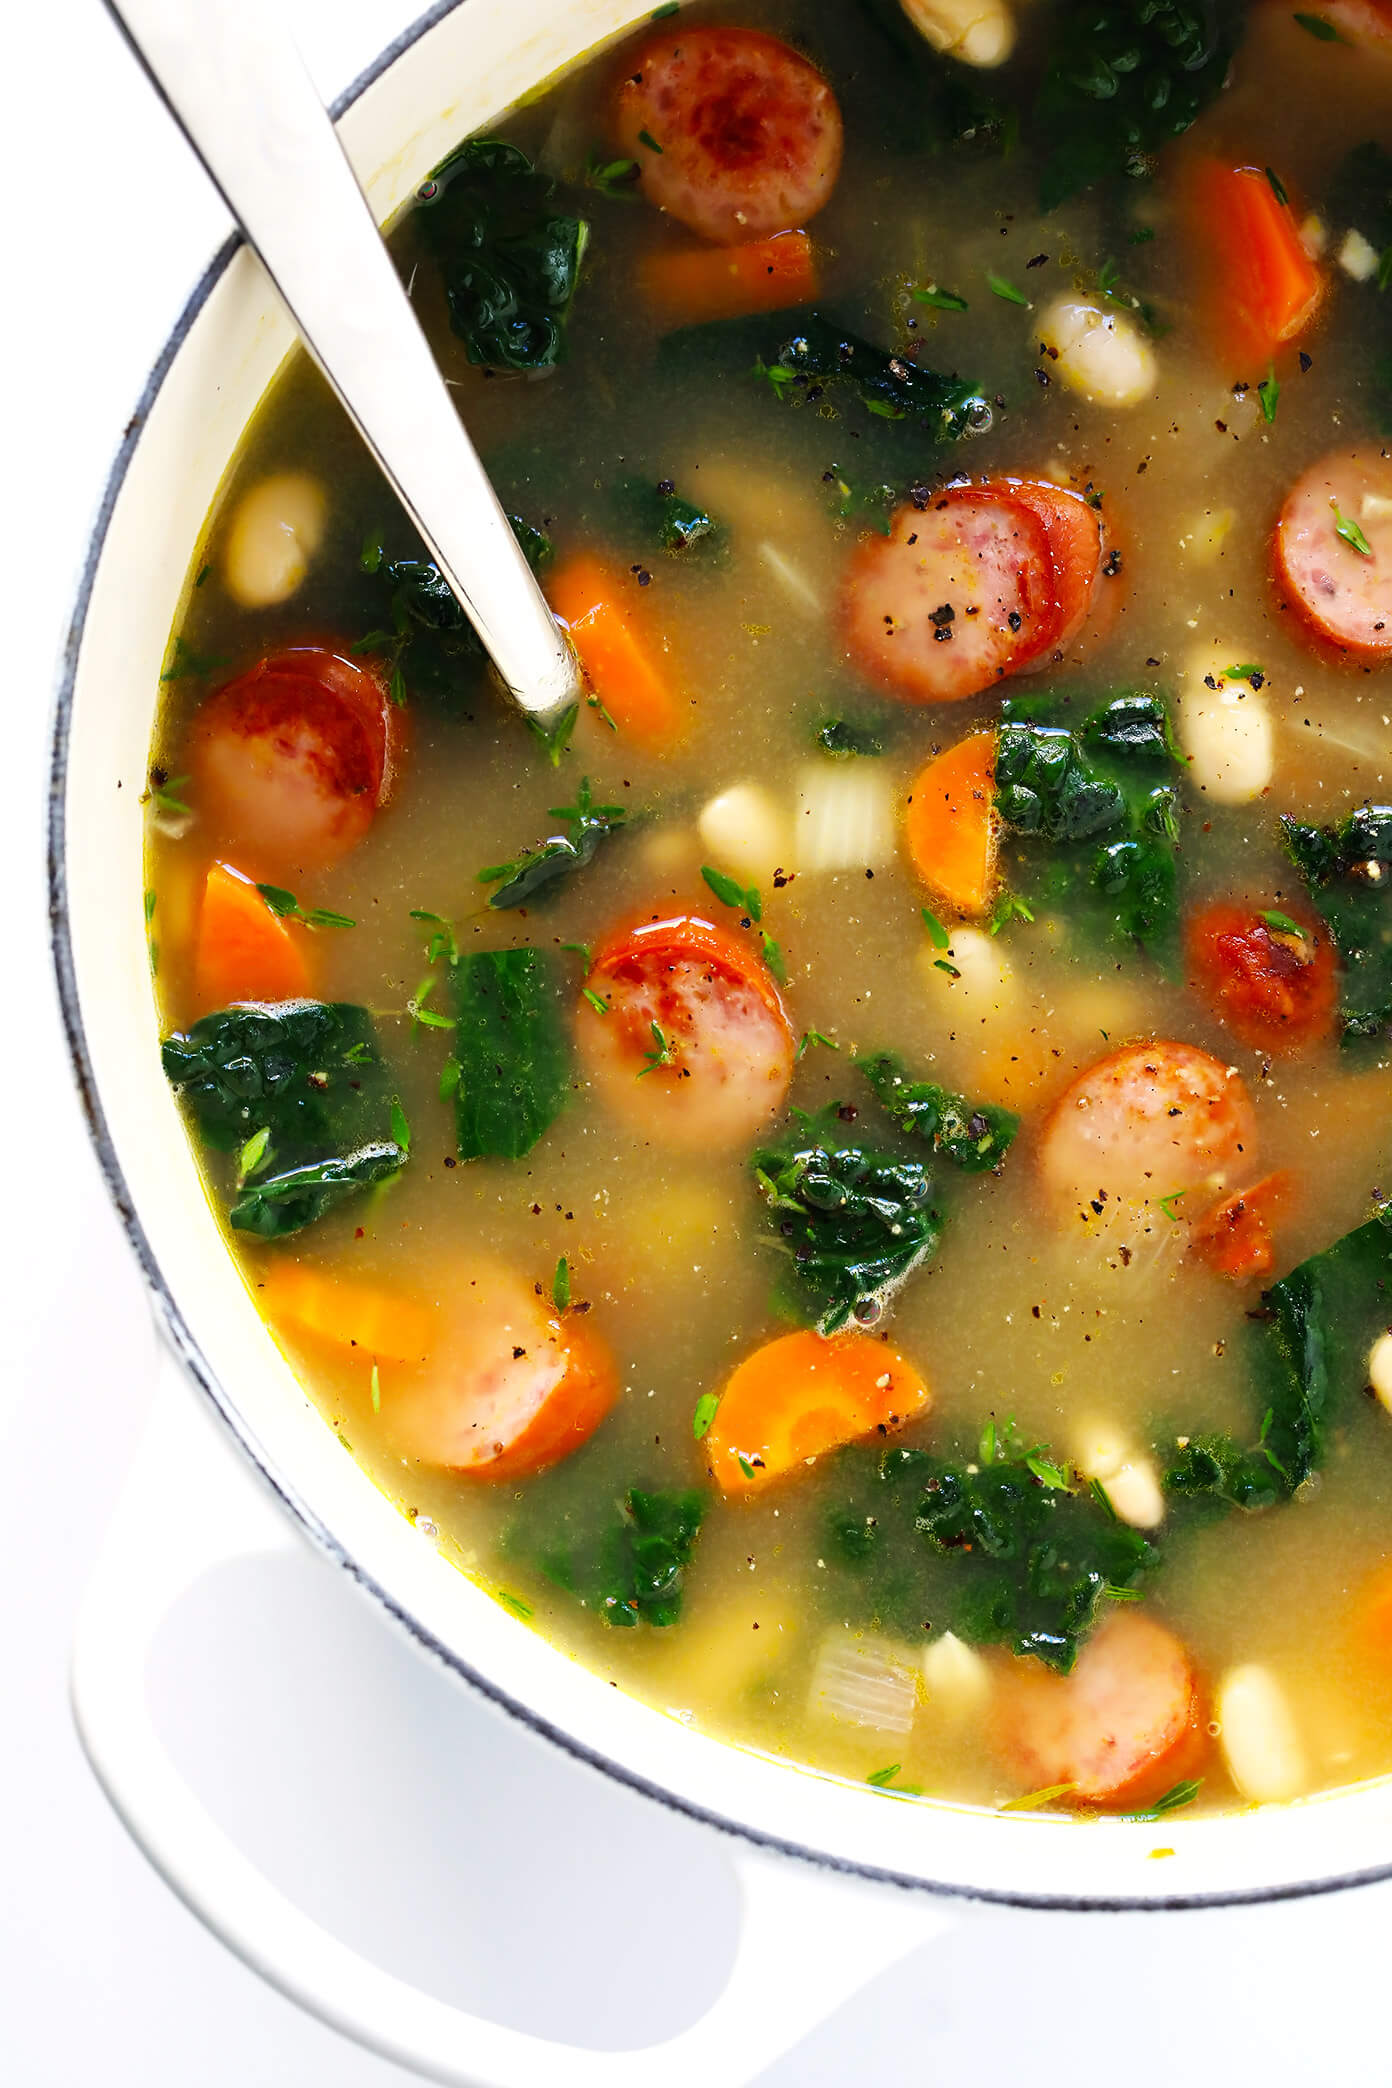 This Tuscan White Beans, Sausage and Kale Soup is one of my favorite winter dinner recipes. It's easy to make, full of cozy Italian flavors, and it's so warm and comforting. | Gimme Some Oven #souprecipe #healthysoup #italianrecipes